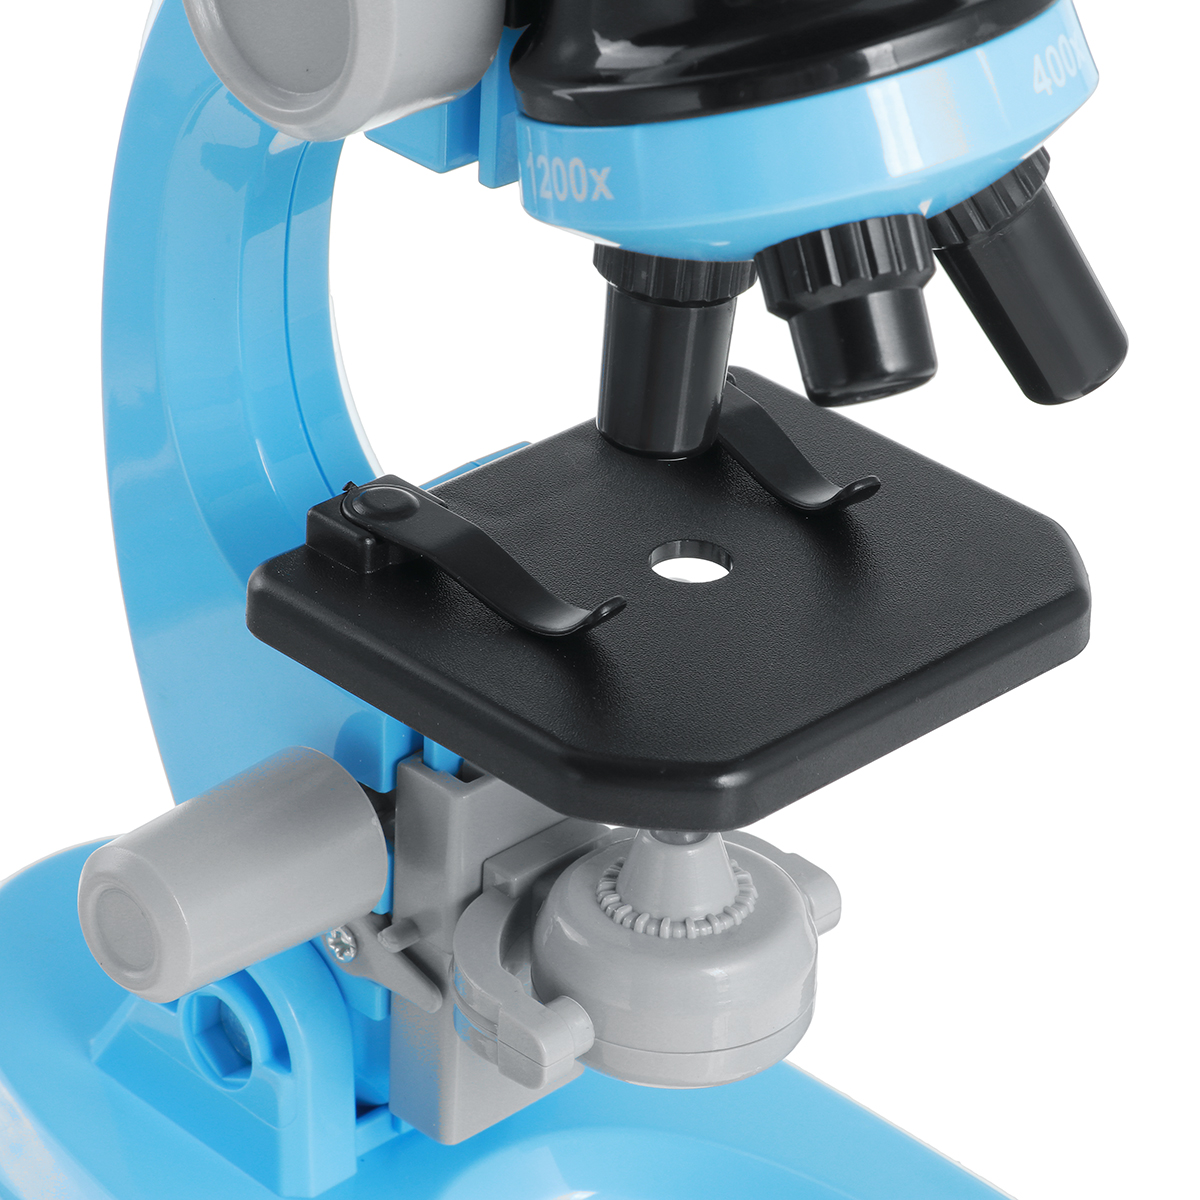 1200X-400X-100X-Magnification-Kids-Microscope-Children-Science-Educational-Toy-for-Science-Experimen-1854876-13